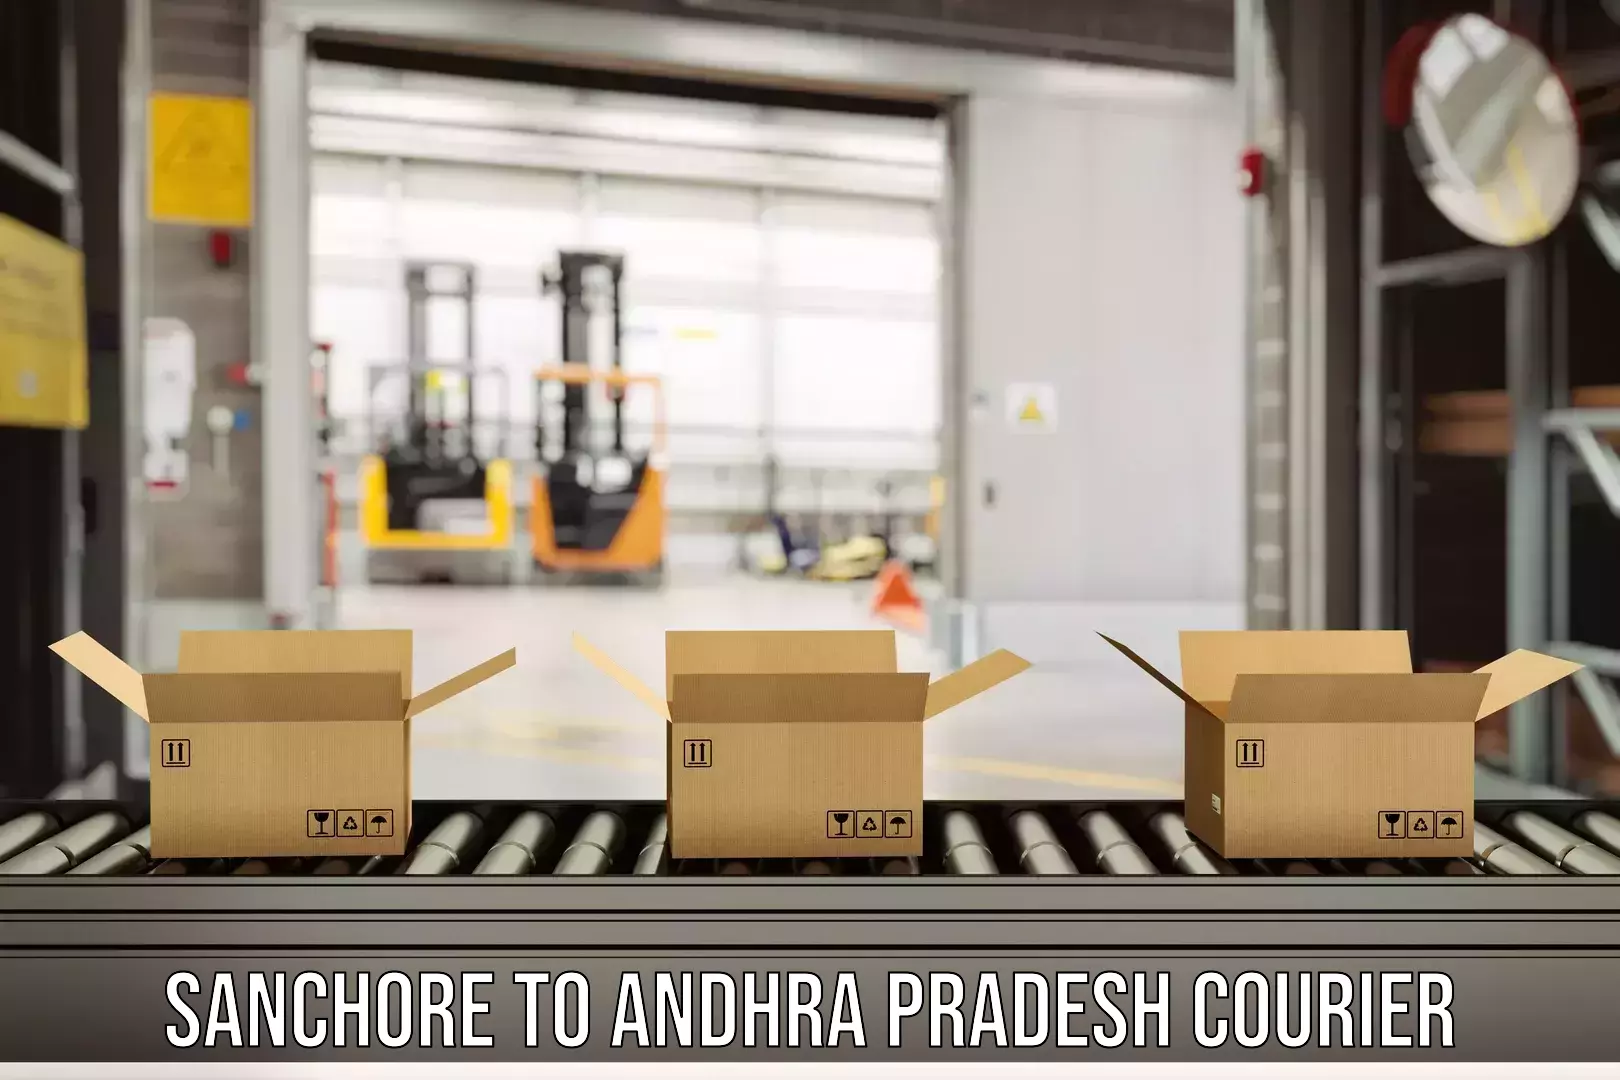 Express delivery capabilities in Sanchore to Punganur